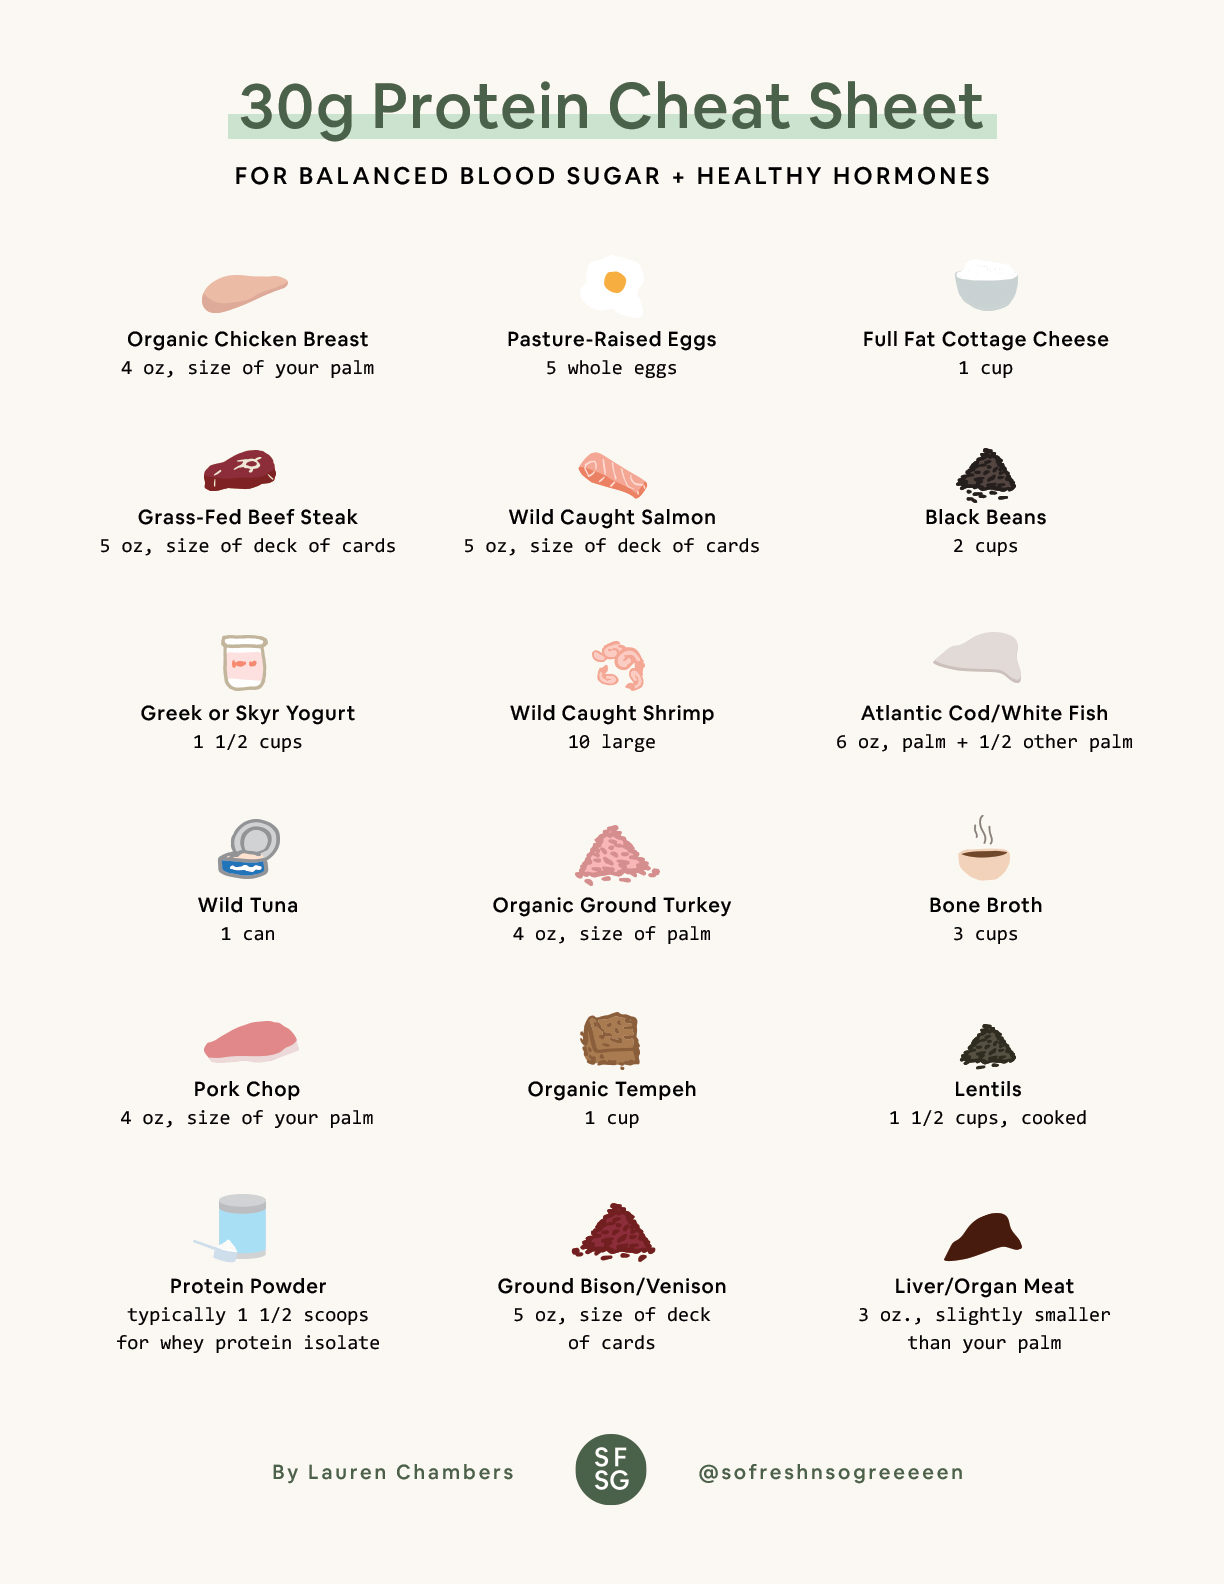 30 Grams of Protein Cheat Sheet